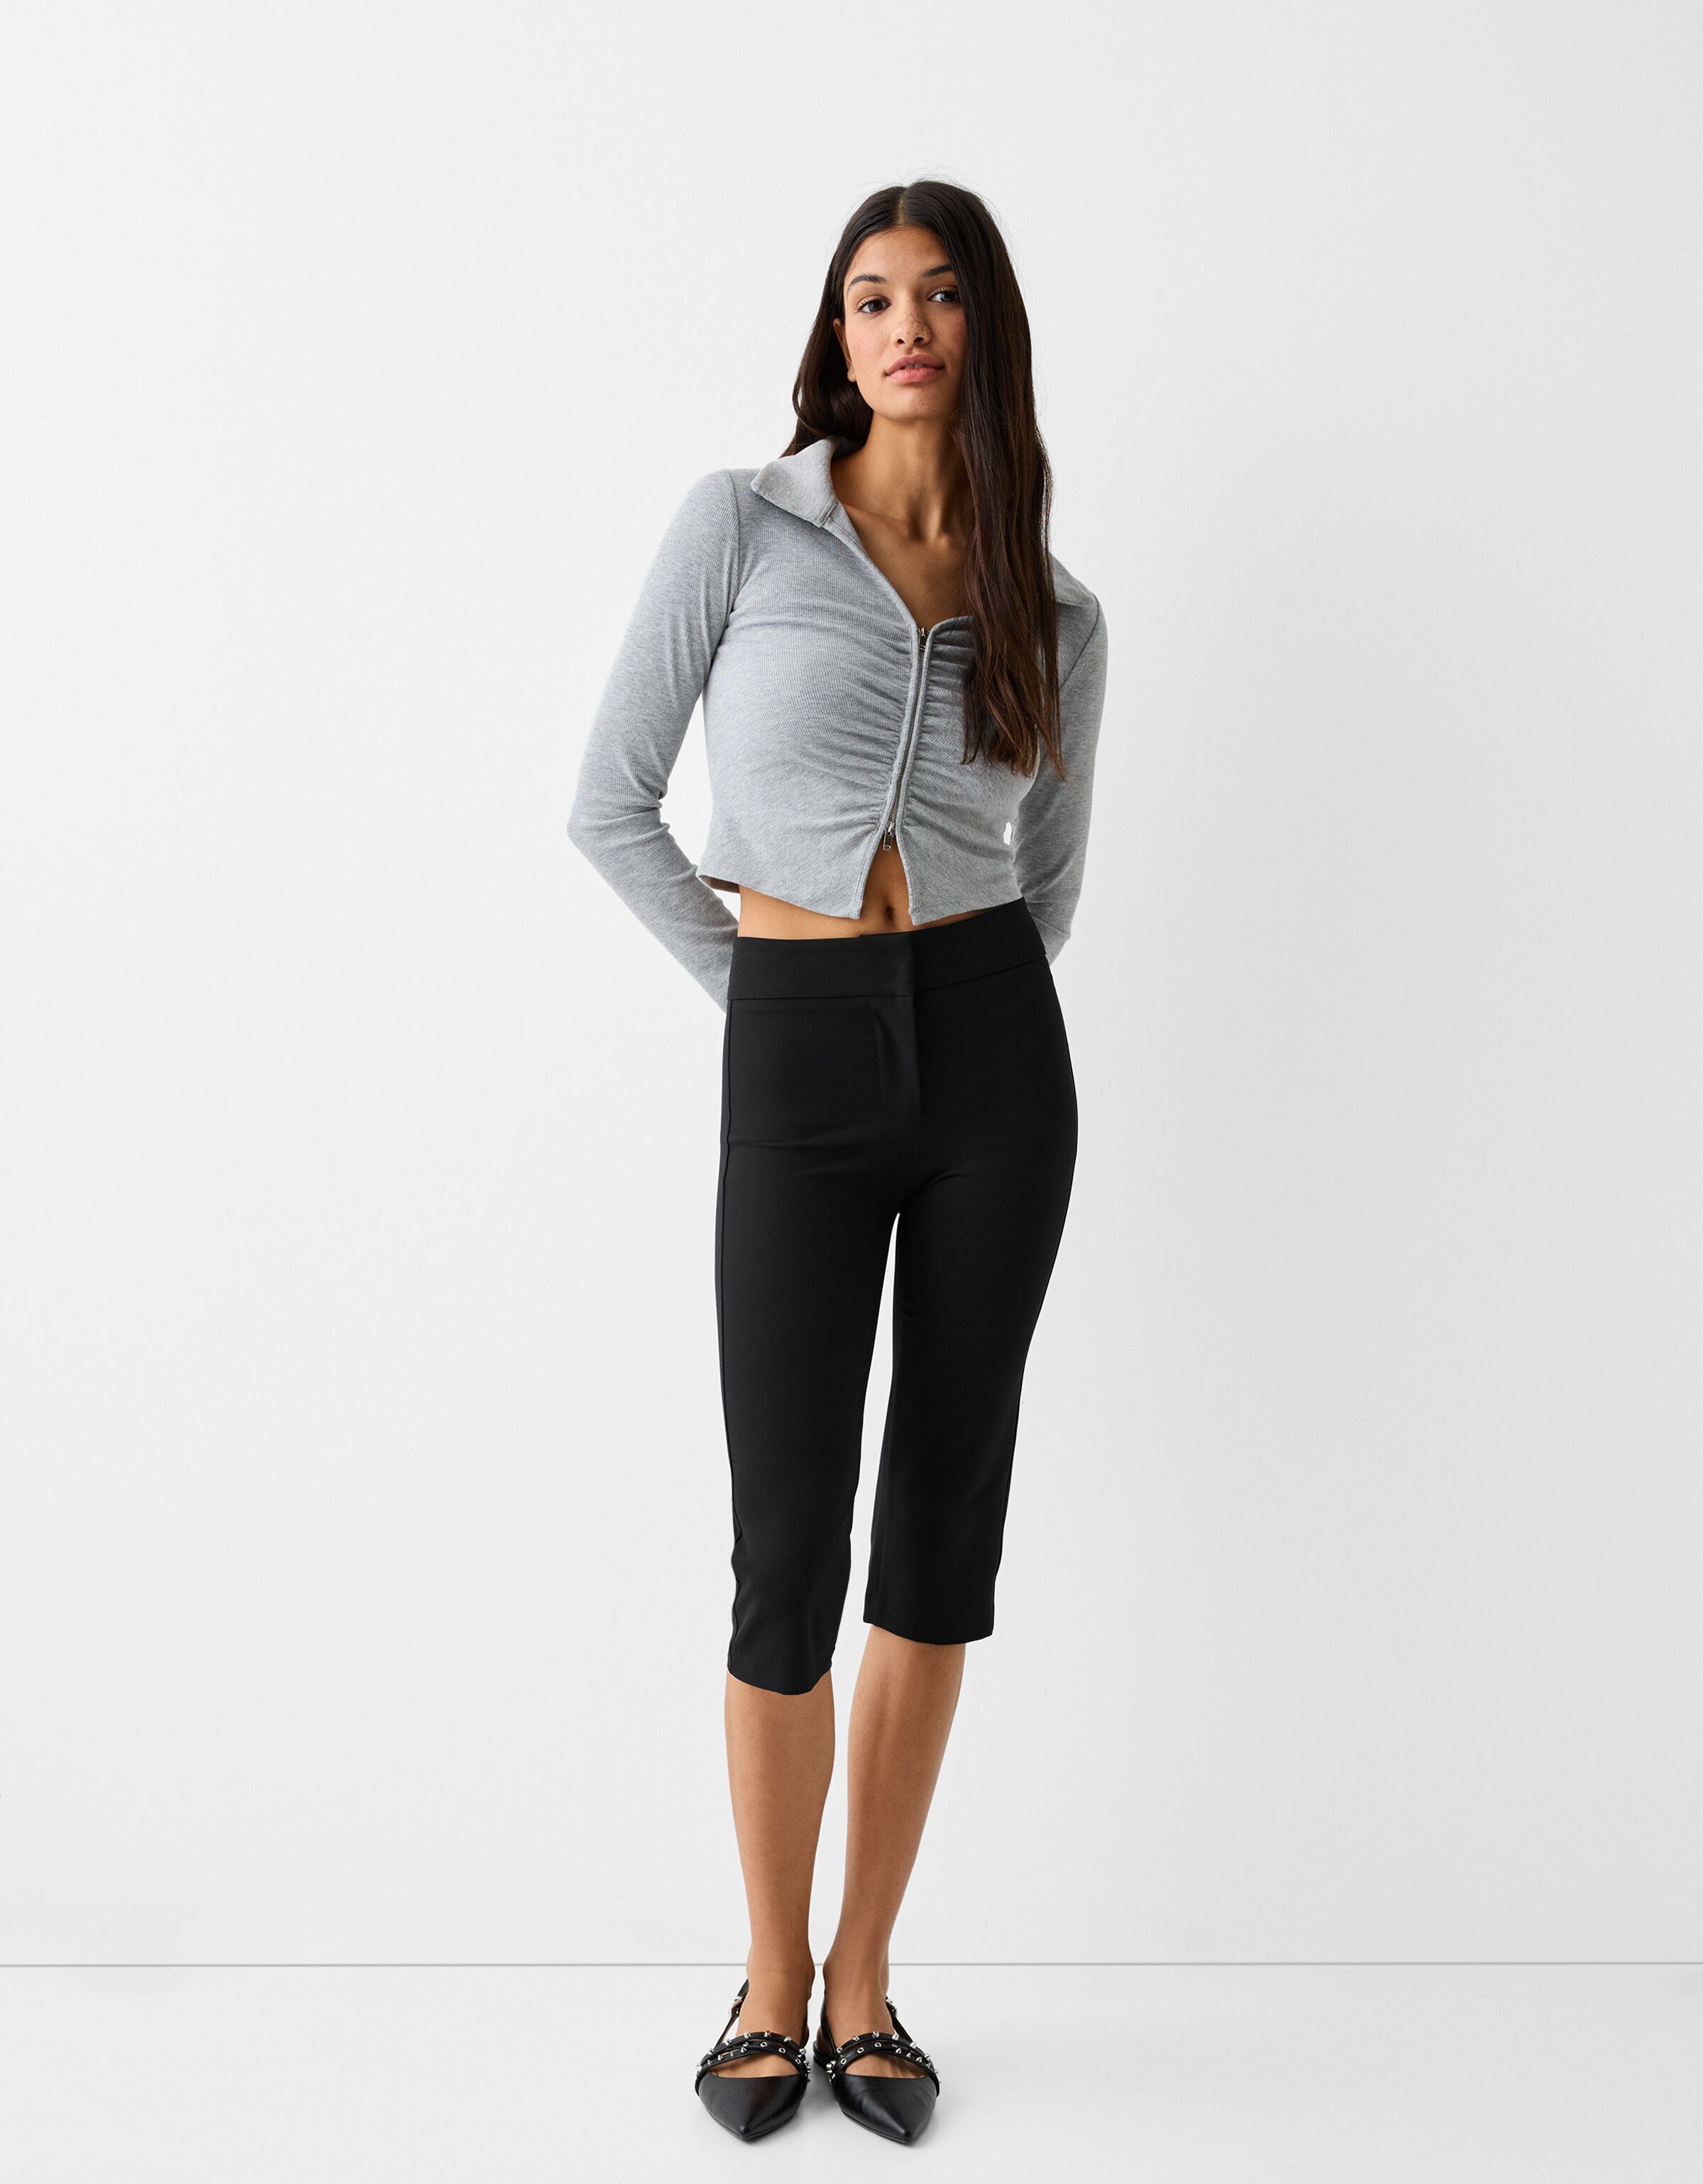 Women's Smart Trousers | Explore our New Arrivals | ZARA Iceland